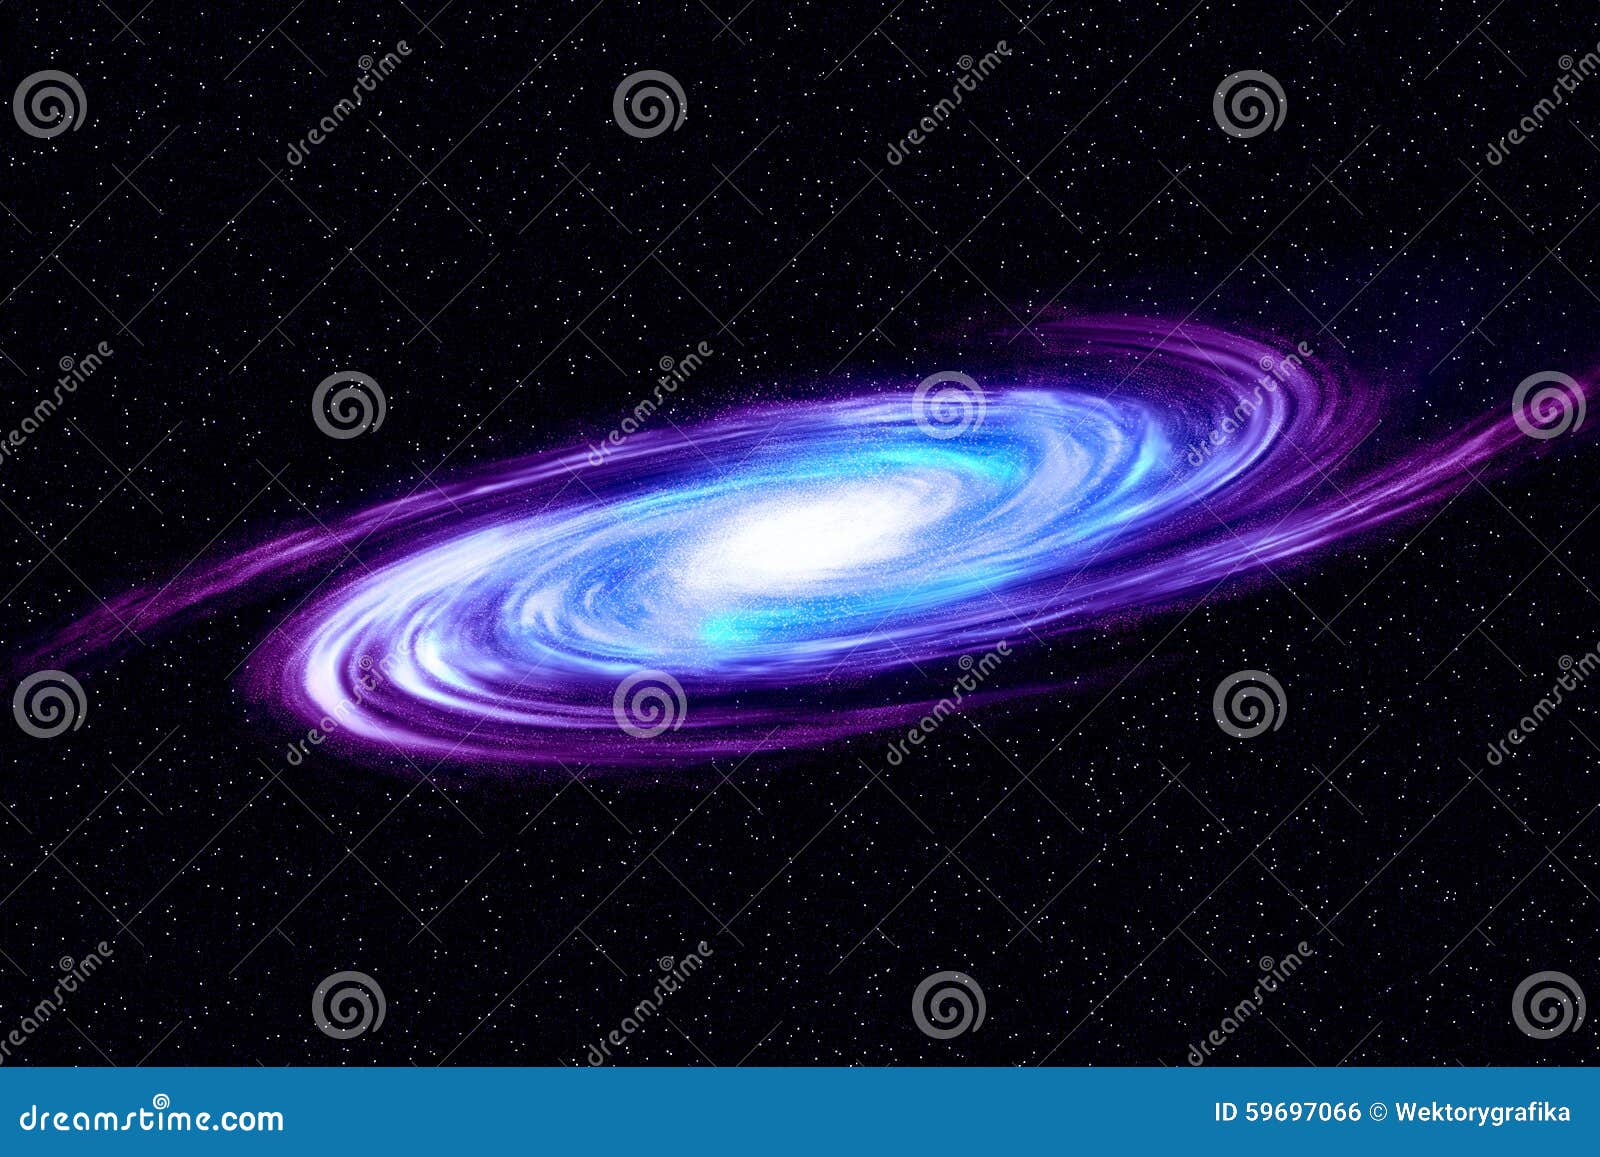 image of spiral galaxy. spiral galaxy in deep space with star field background. computer generated abstract background.